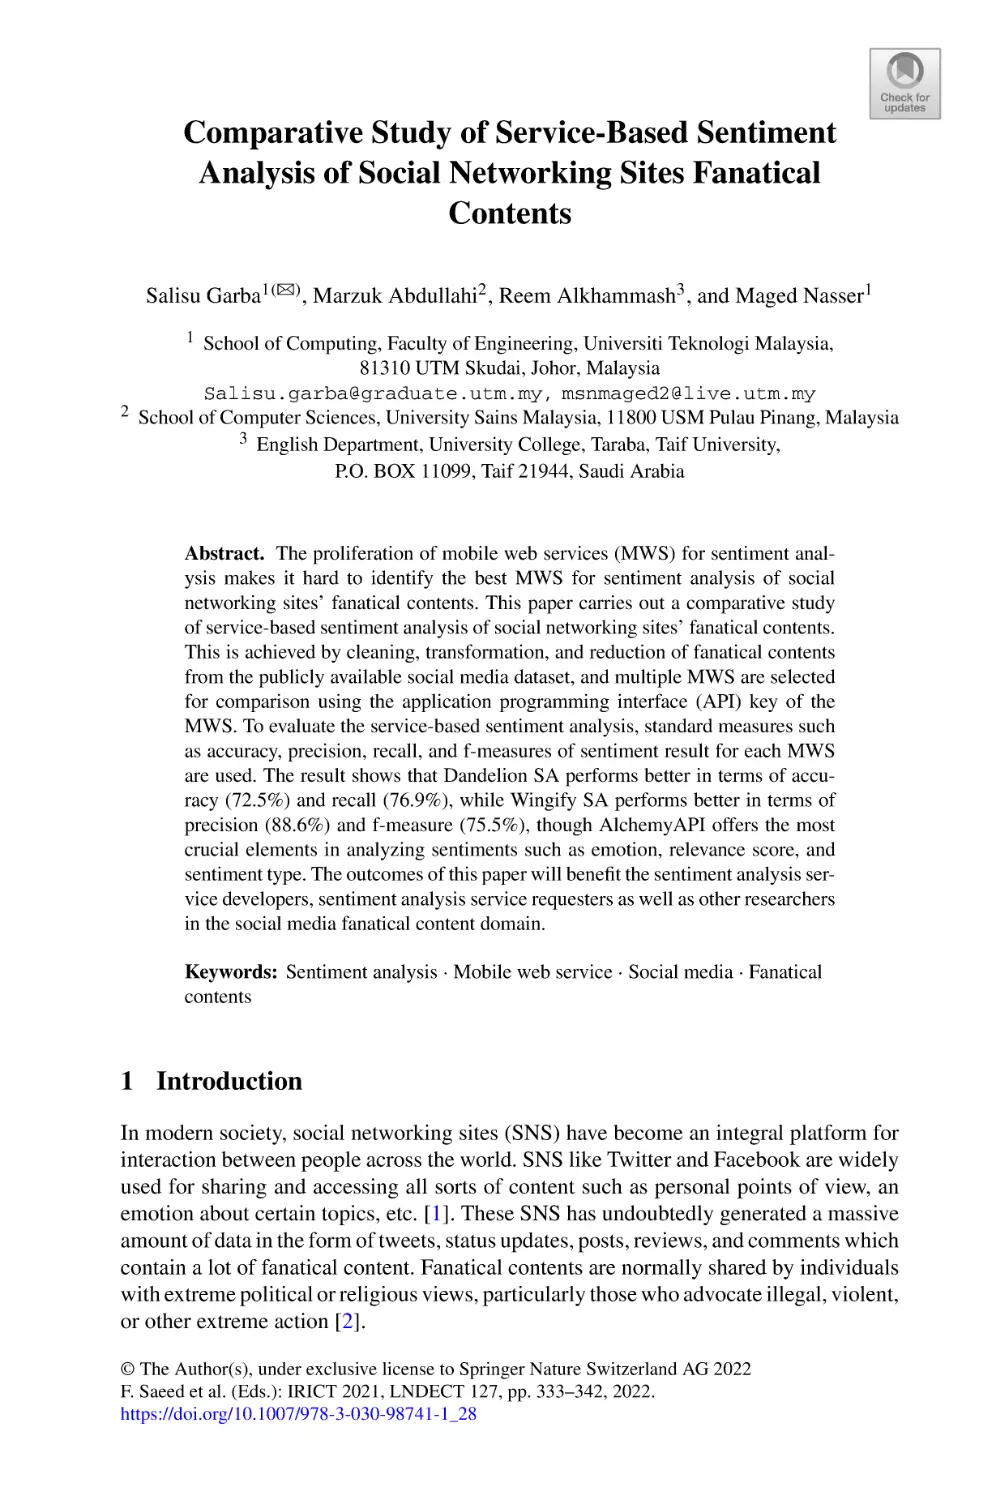 Comparative Study of Service-Based Sentiment Analysis of Social Networking Sites Fanatical Contents
1 Introduction